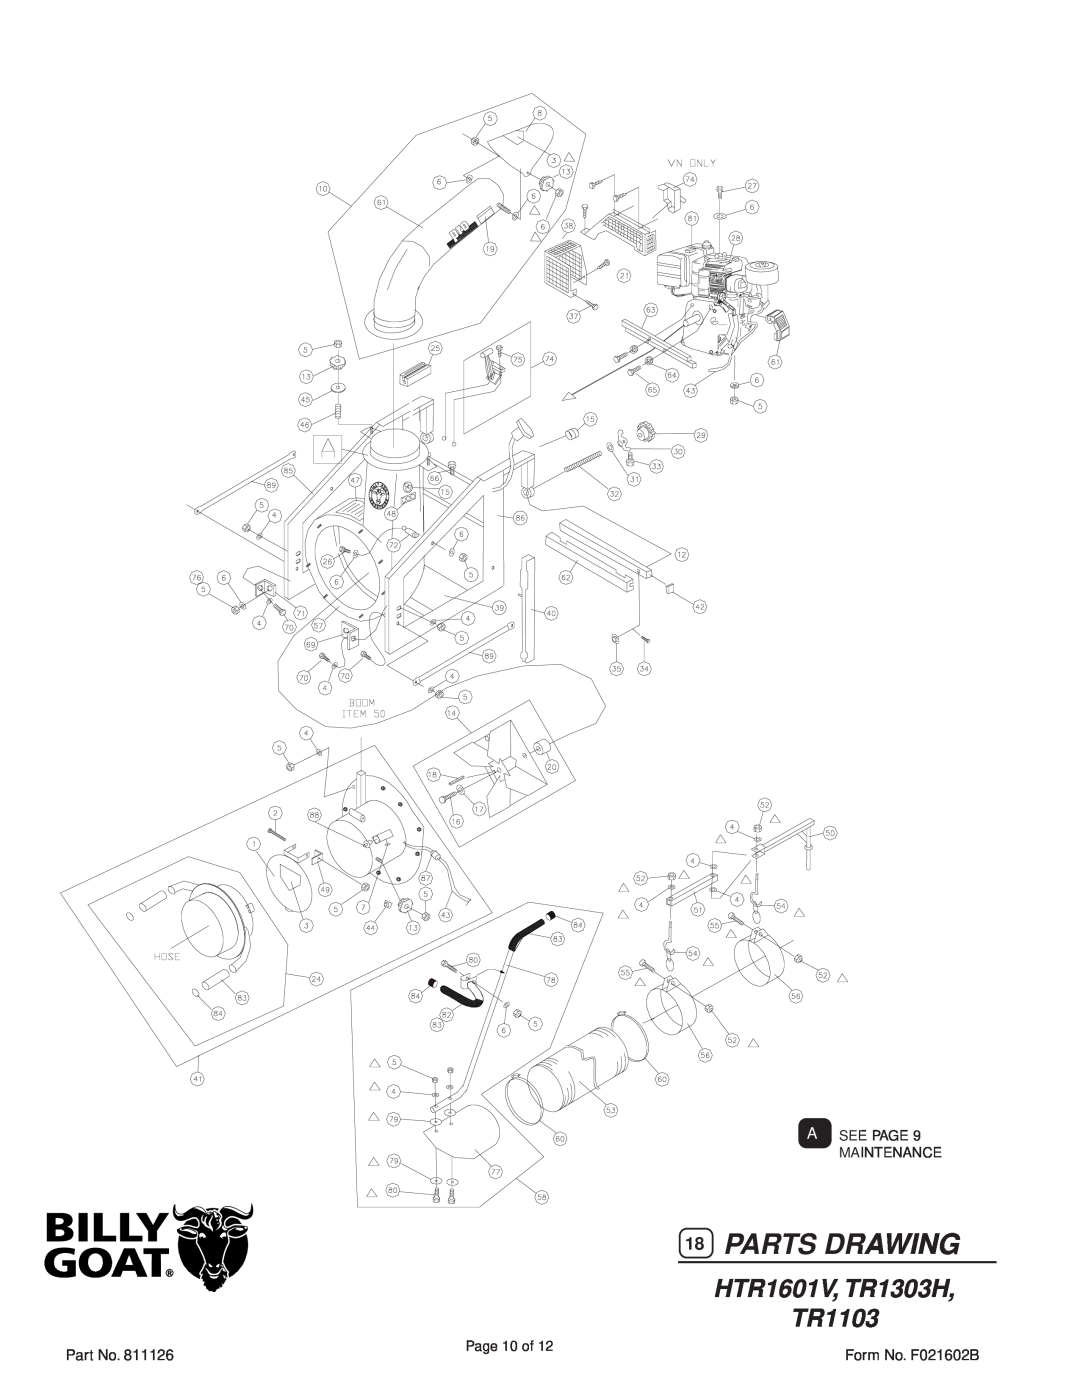 Billy Goat specifications Parts Drawing, HTR1601V, TR1303H TR1103 